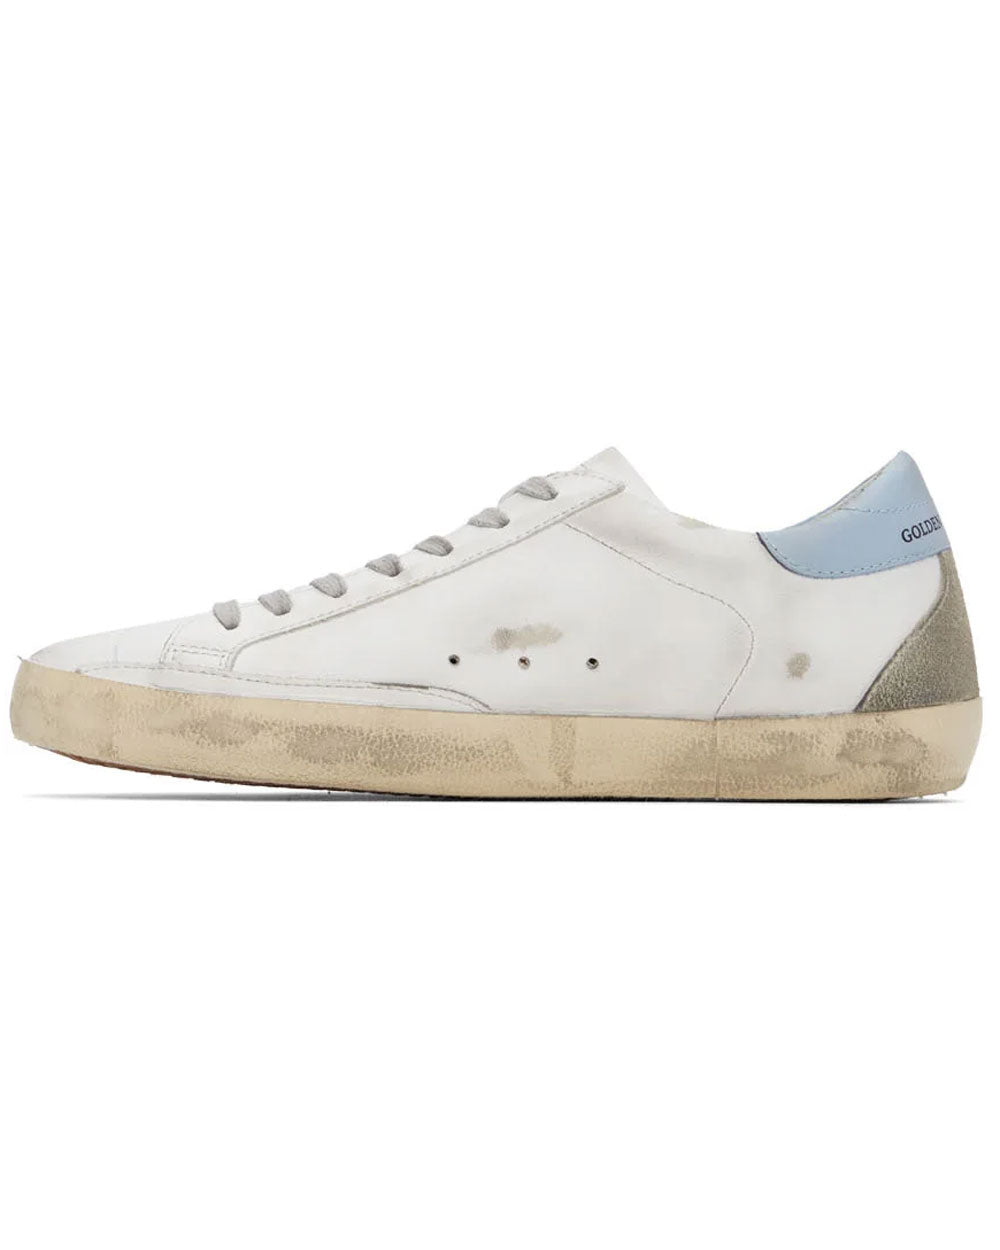 Superstar Sneaker in White and Powder Blue